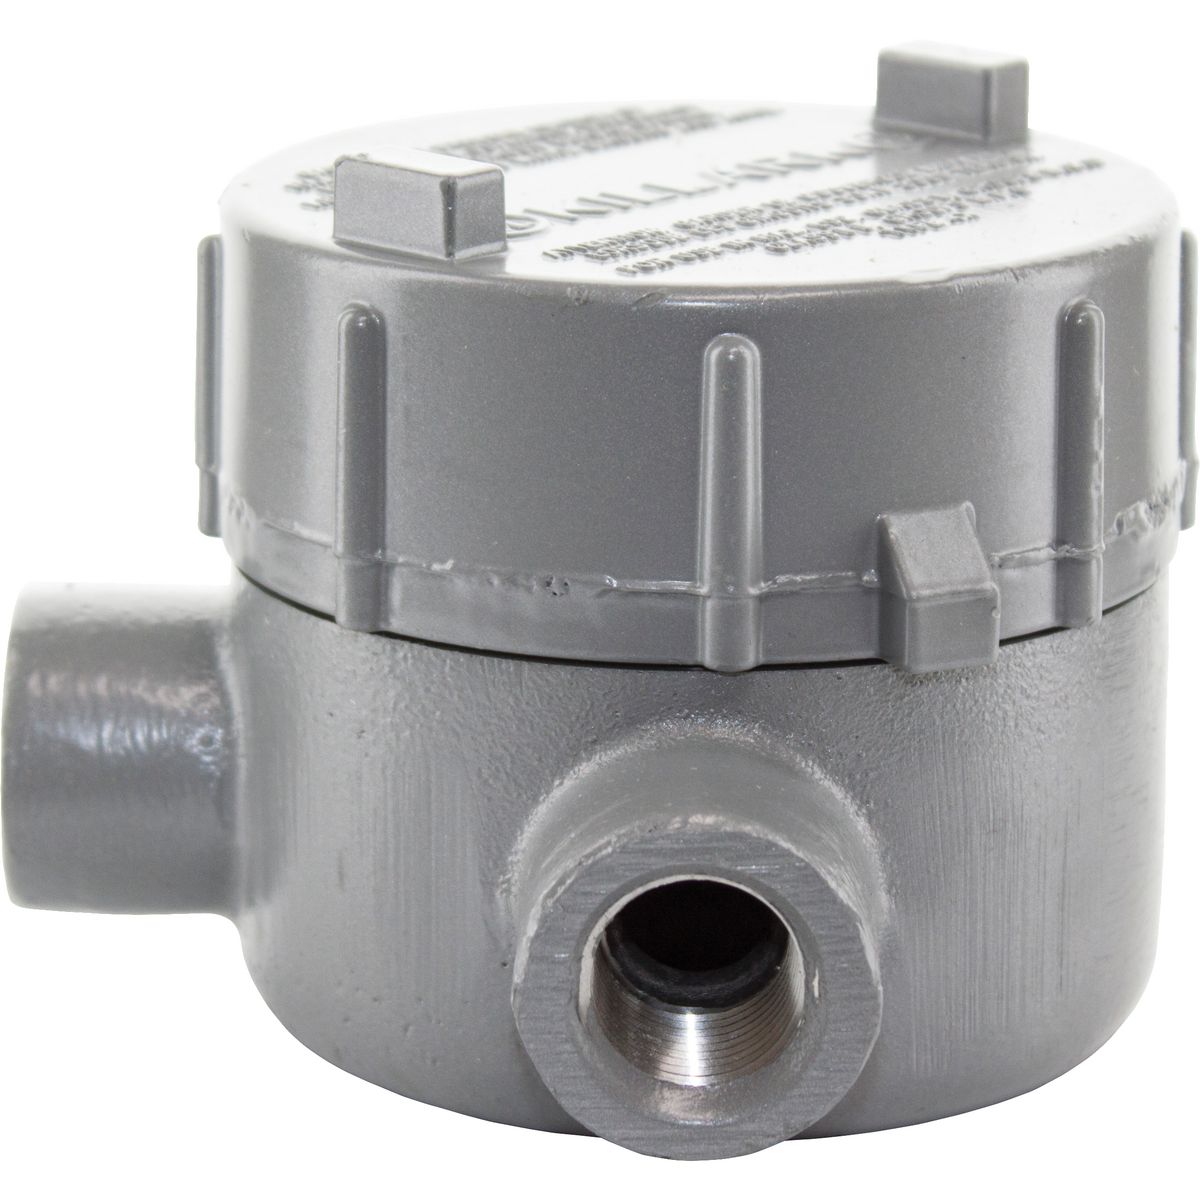 GEC SERIES FITTINGS - ALUMINUM - L TYPE OUTLET BODY - HUB SIZE 1 IN -VOLUME 18.0 CU IN